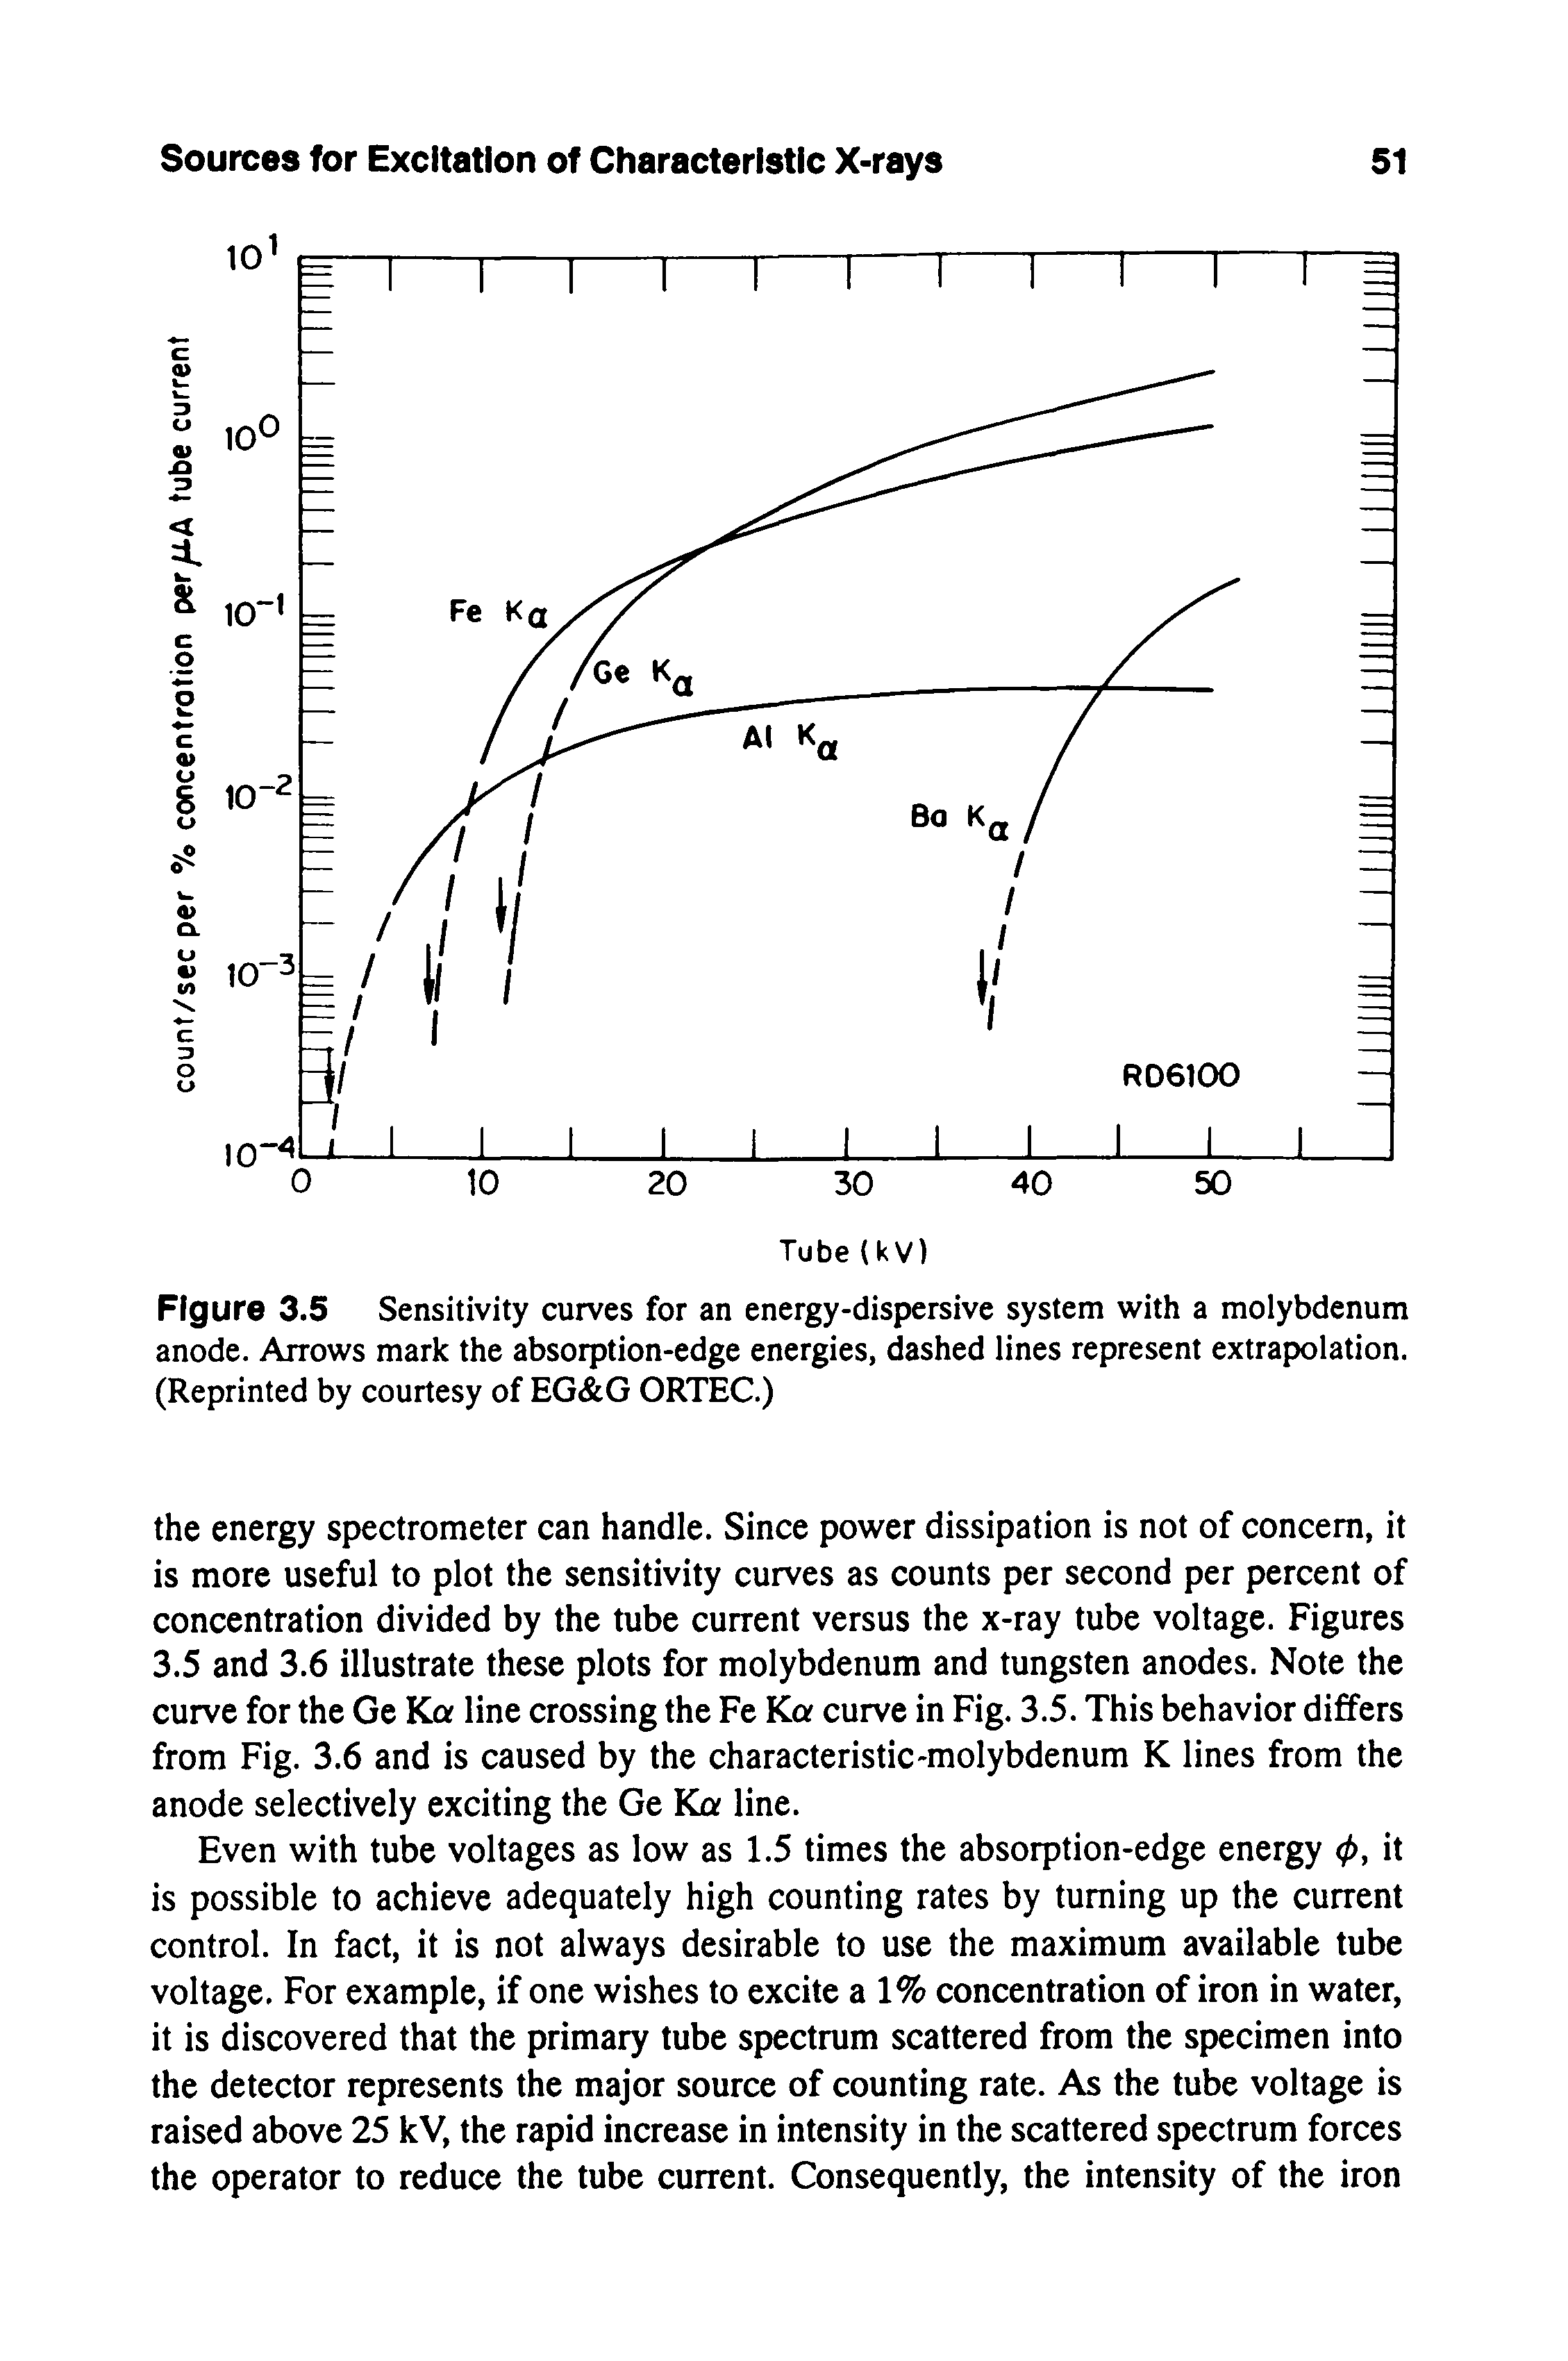 Figure 3.5 Sensitivity curves for an energy-dispersive system with a molybdenum anode. Arrows mark the absorption-edge energies, dashed lines represent extrapolation. (Reprinted by courtesy of EG G ORTEC.)...